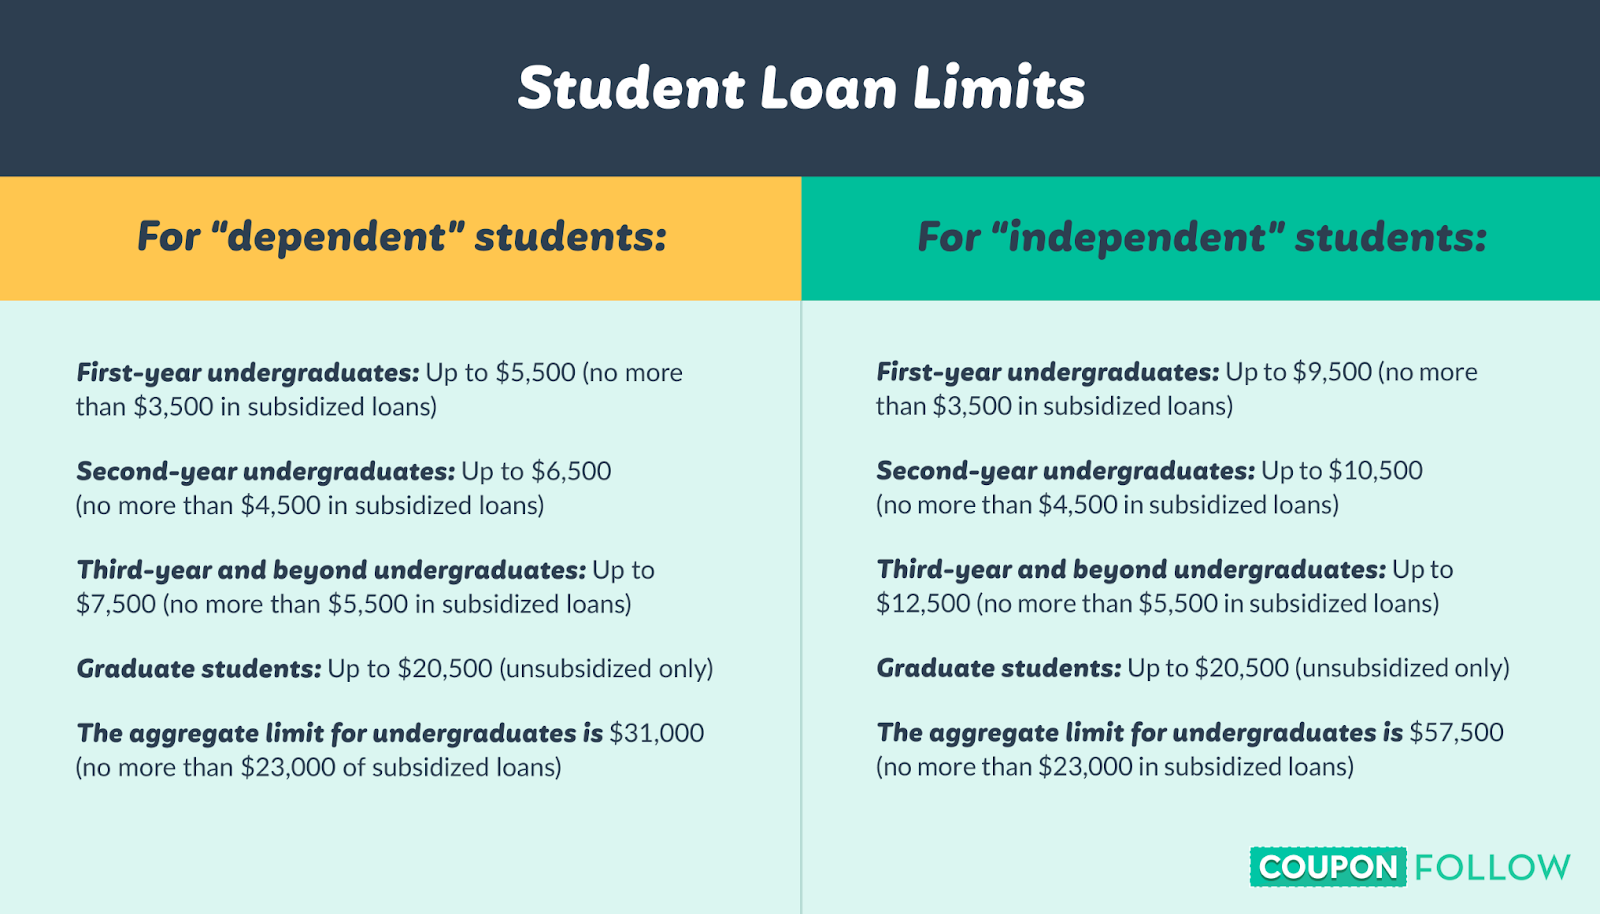 Limits on federal student loans